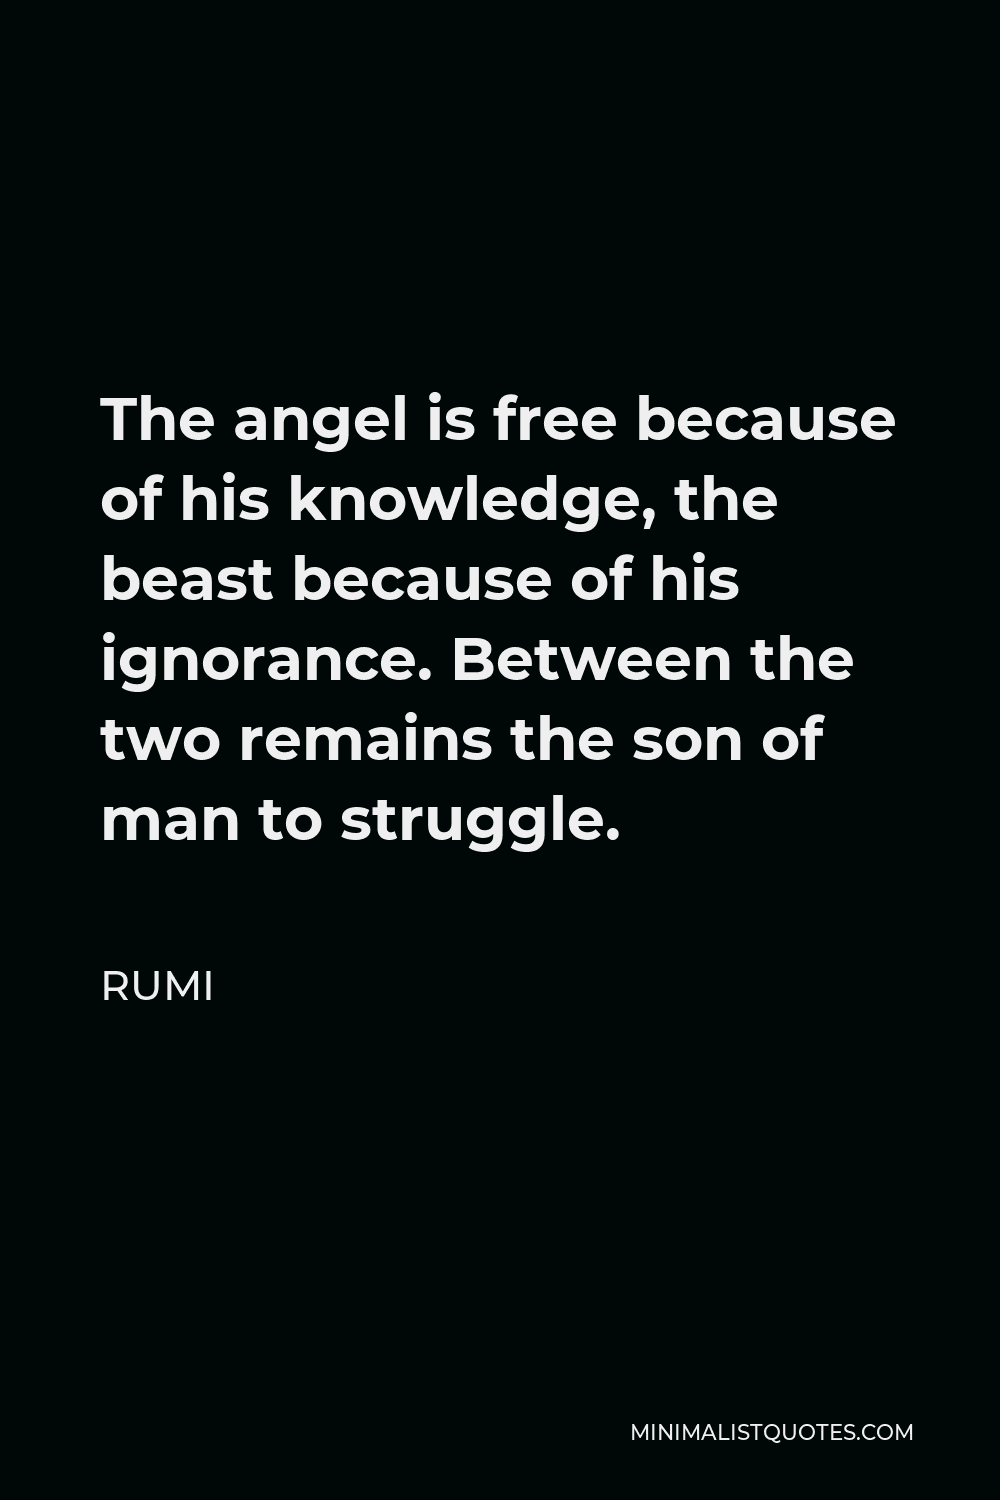 Rumi Quote - The angel is free because of his knowledge, the beast because of his ignorance. Between the two remains the son of man to struggle.